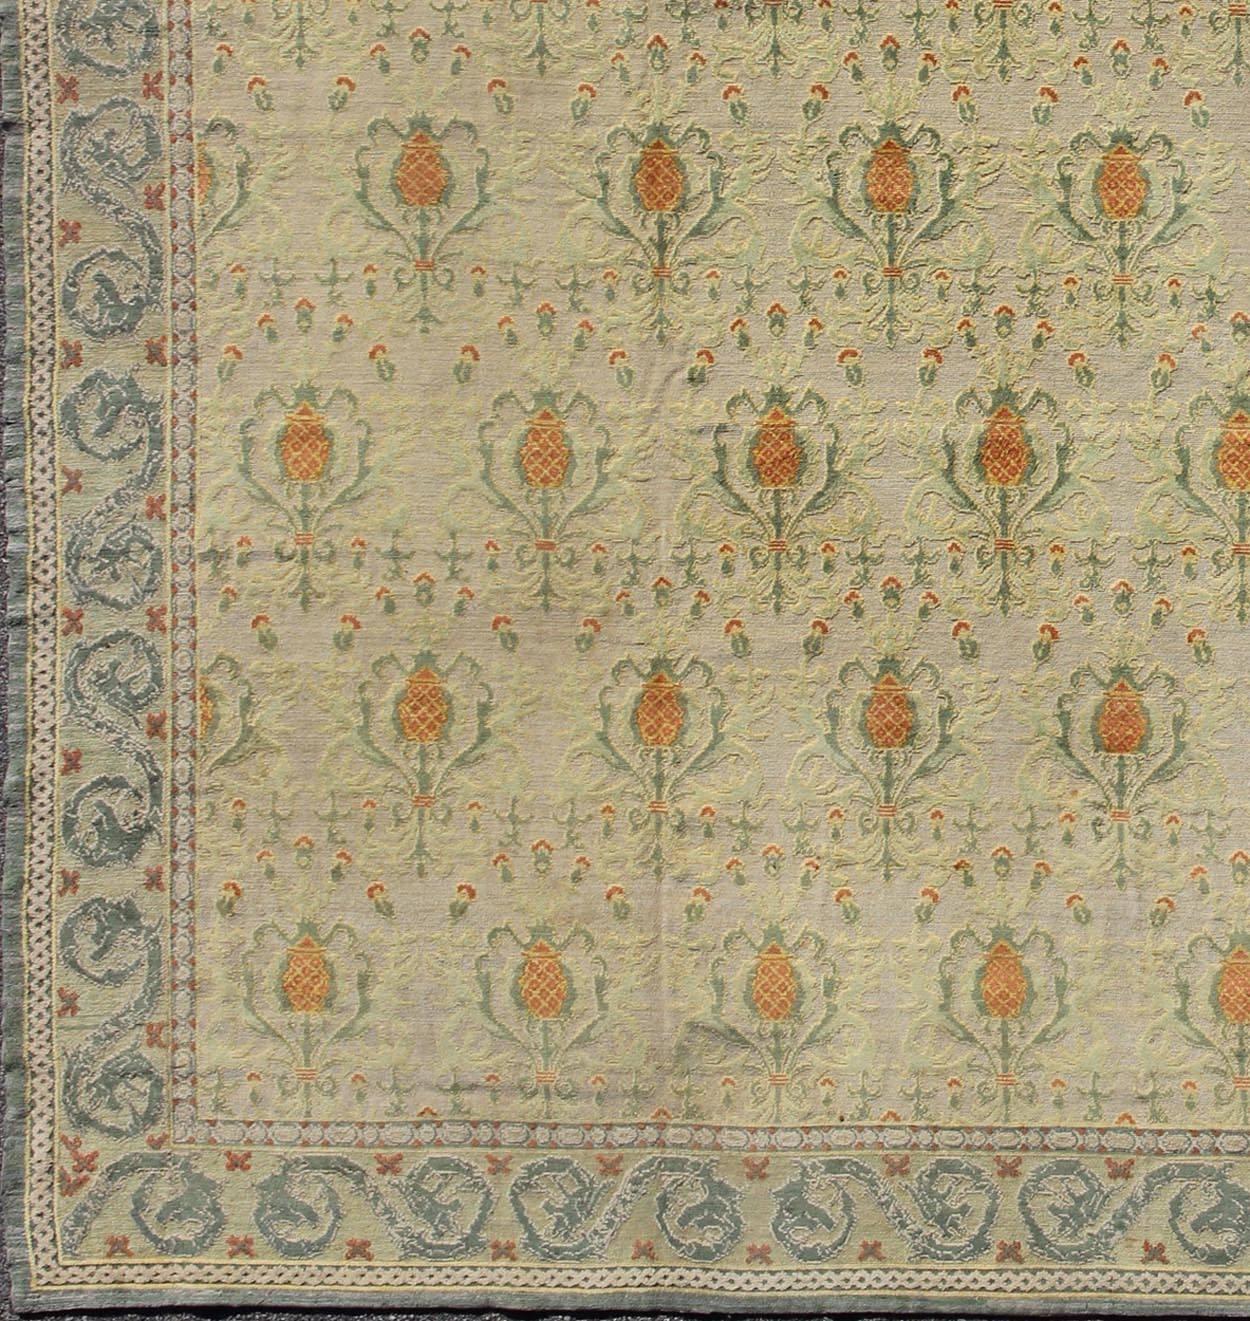 Square size sntique Spanish carpet in green, orange and gray/blue. rug / D-0104. Antique Spanish carpet in pineapple design 
 
This stunning antique Spanish carpet was crafted during the early part of the 20th century. The rug bears a remarkable